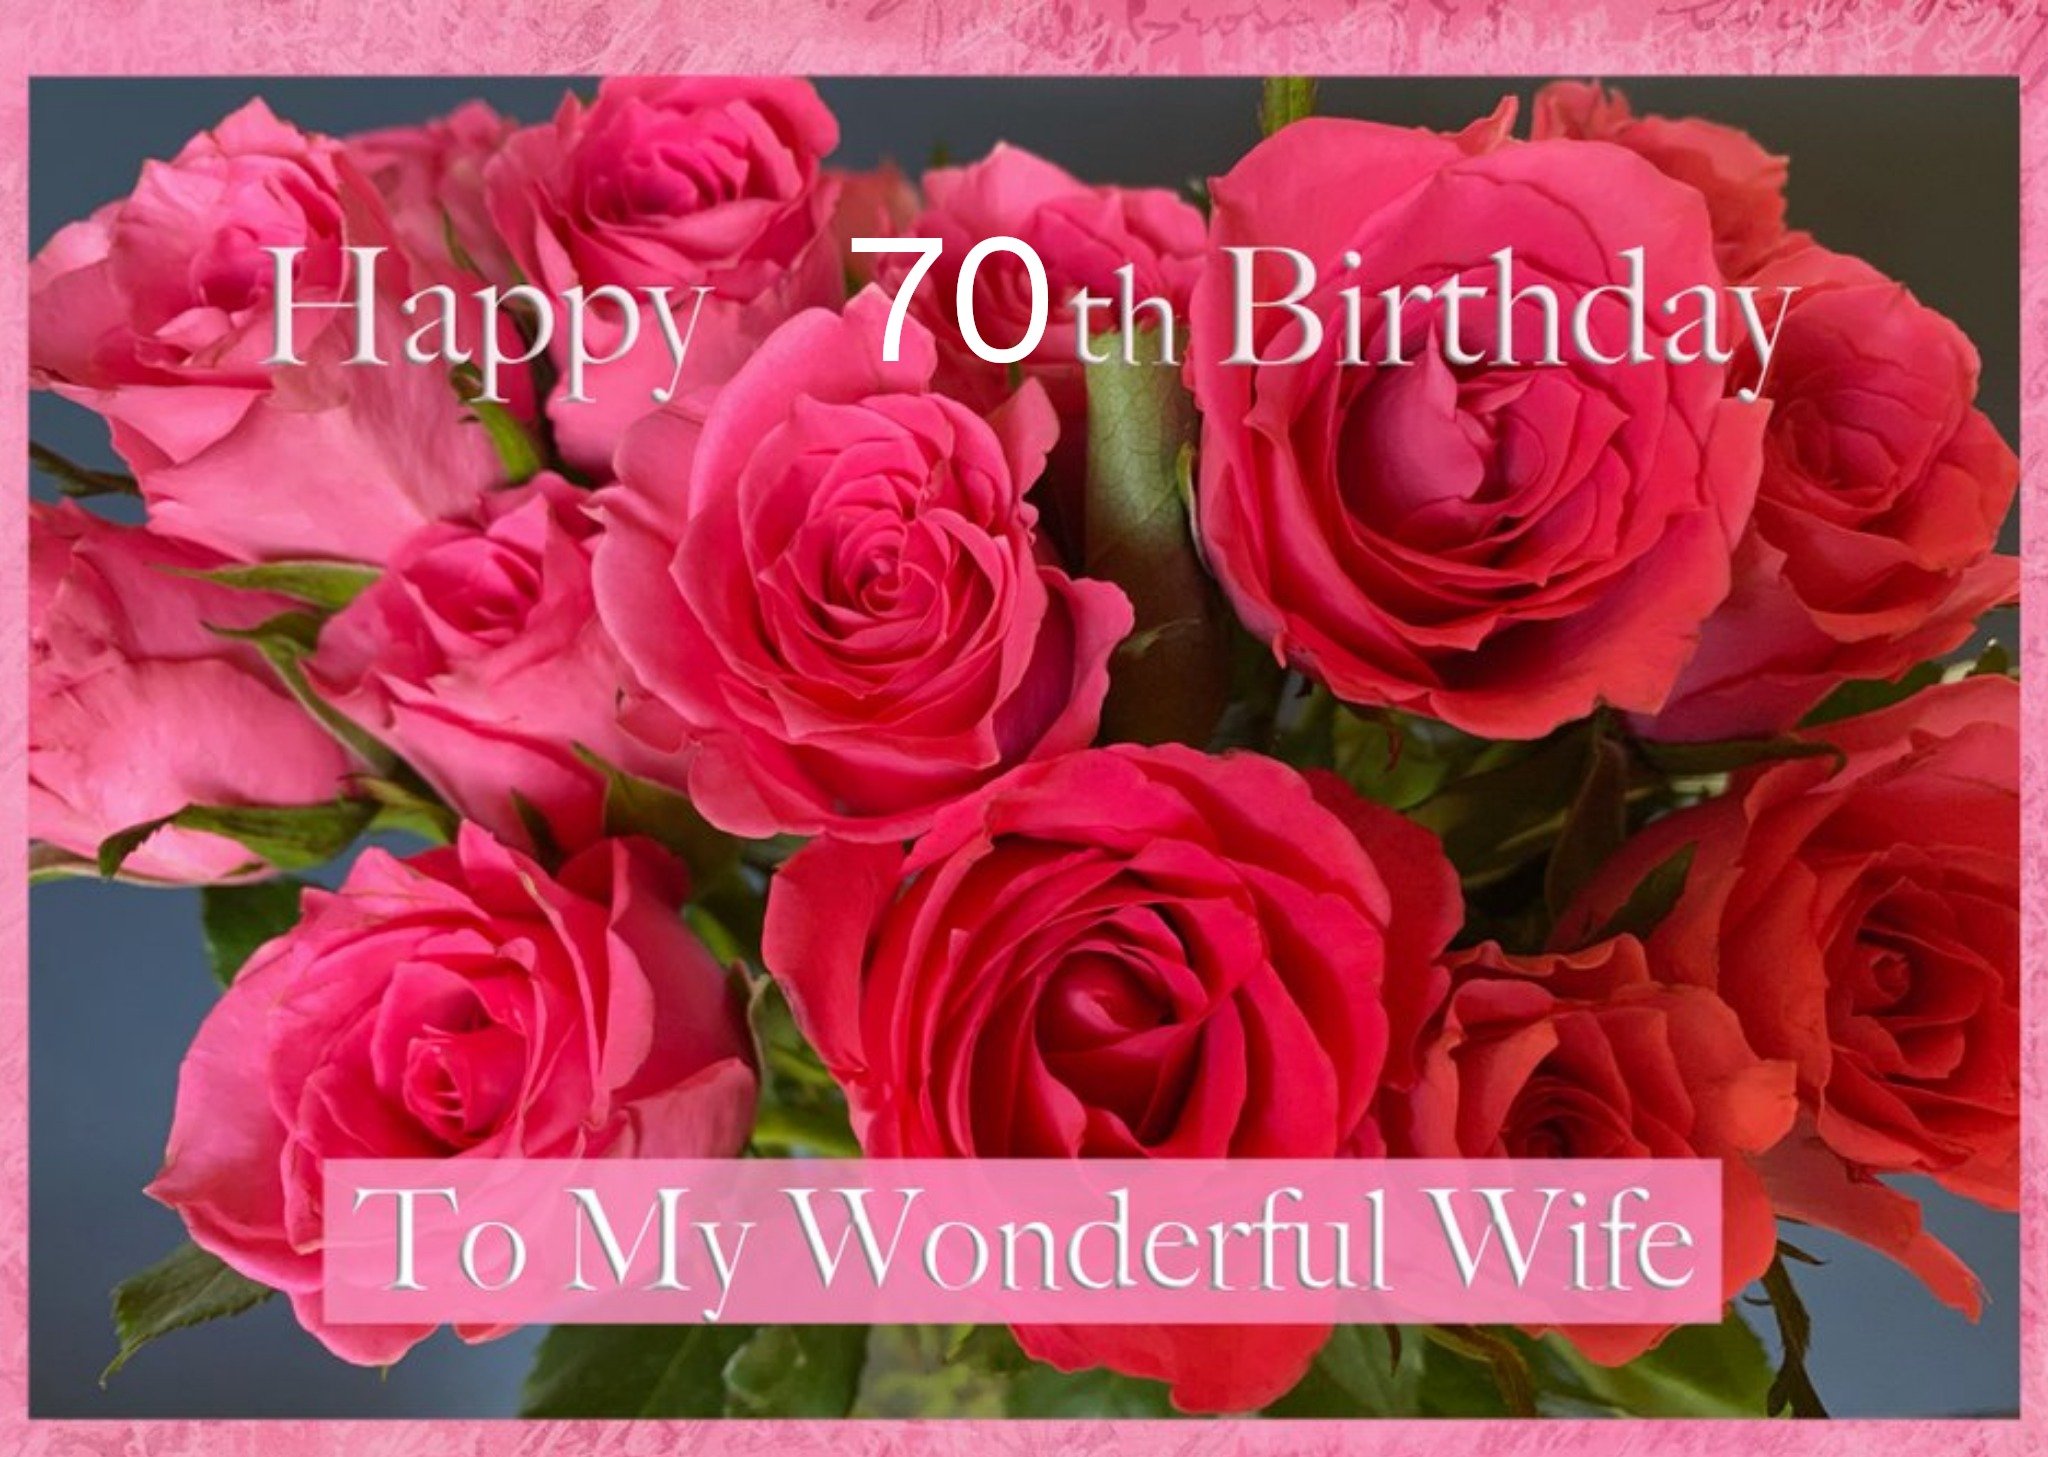 Moonpig Photographic Roses To My Wonderful Wife Birthday Card, Large